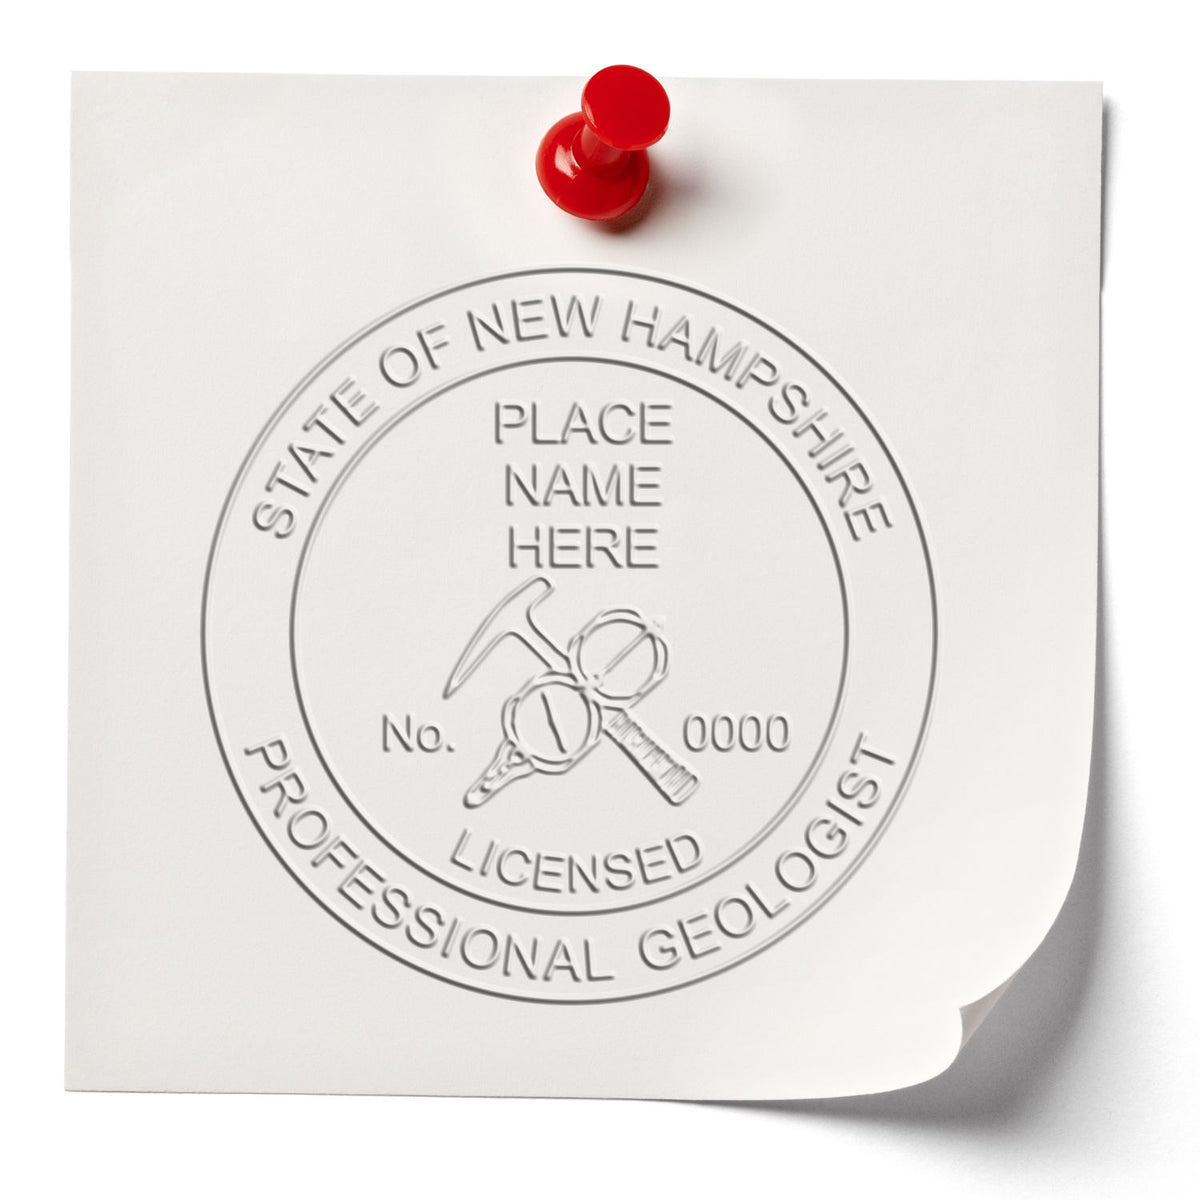 A stamped imprint of the Hybrid New Hampshire Geologist Seal in this stylish lifestyle photo, setting the tone for a unique and personalized product.